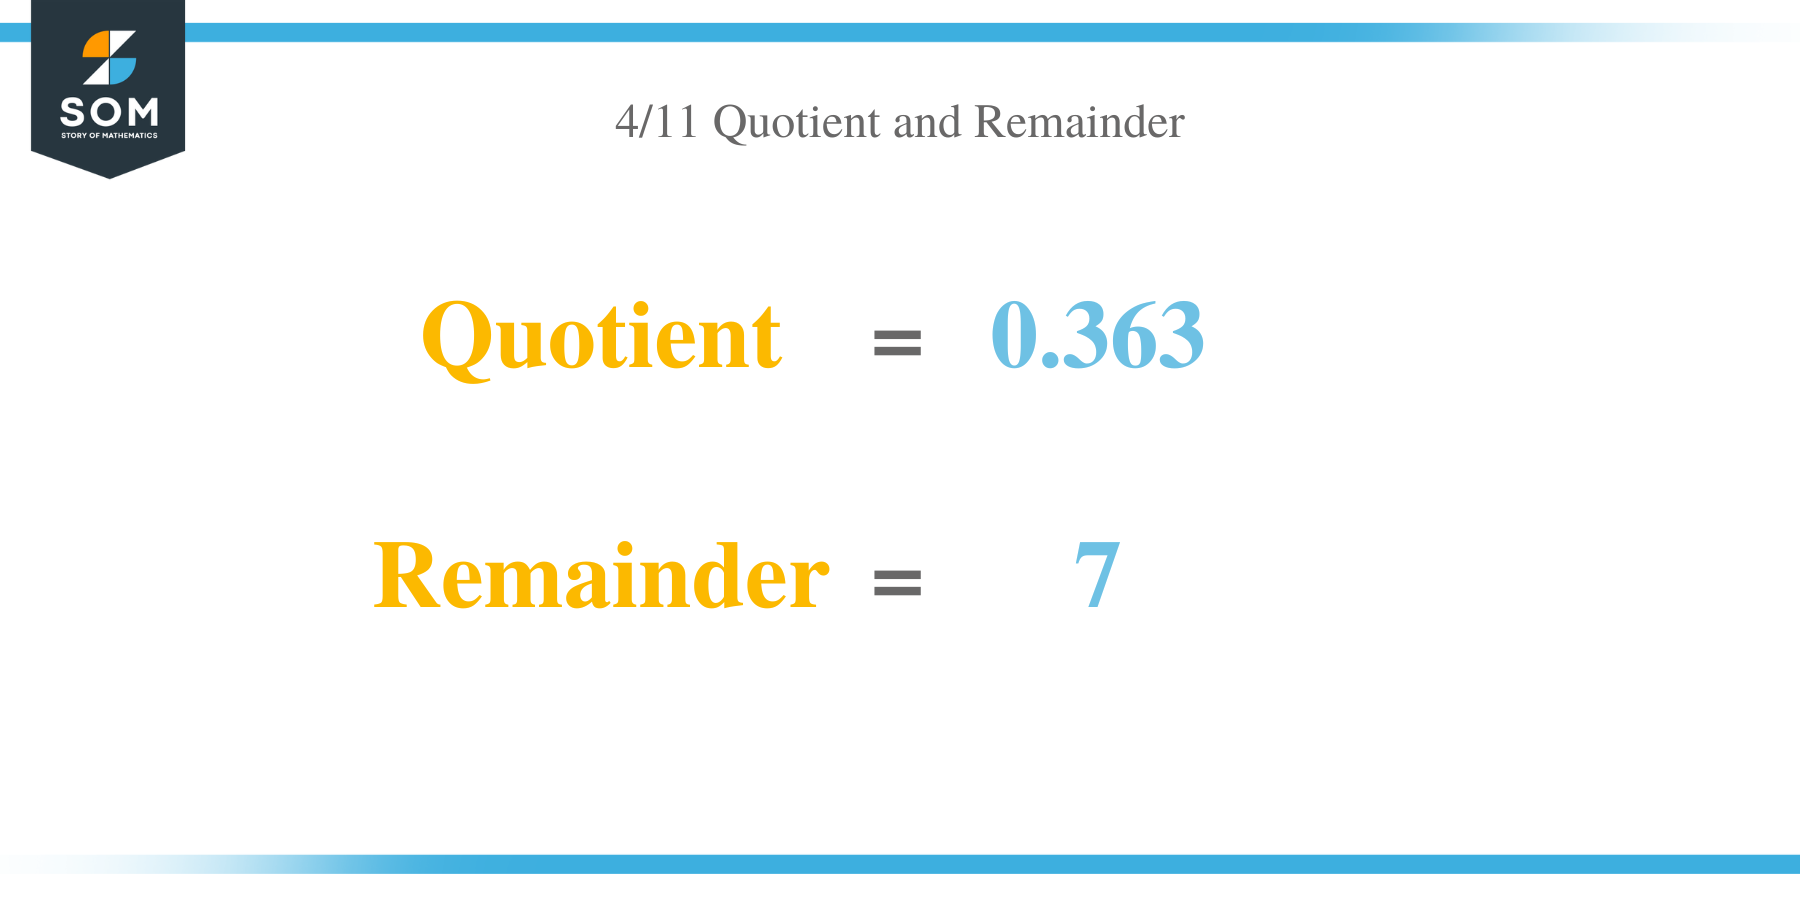 Quotient and Remainer of 4 per 11